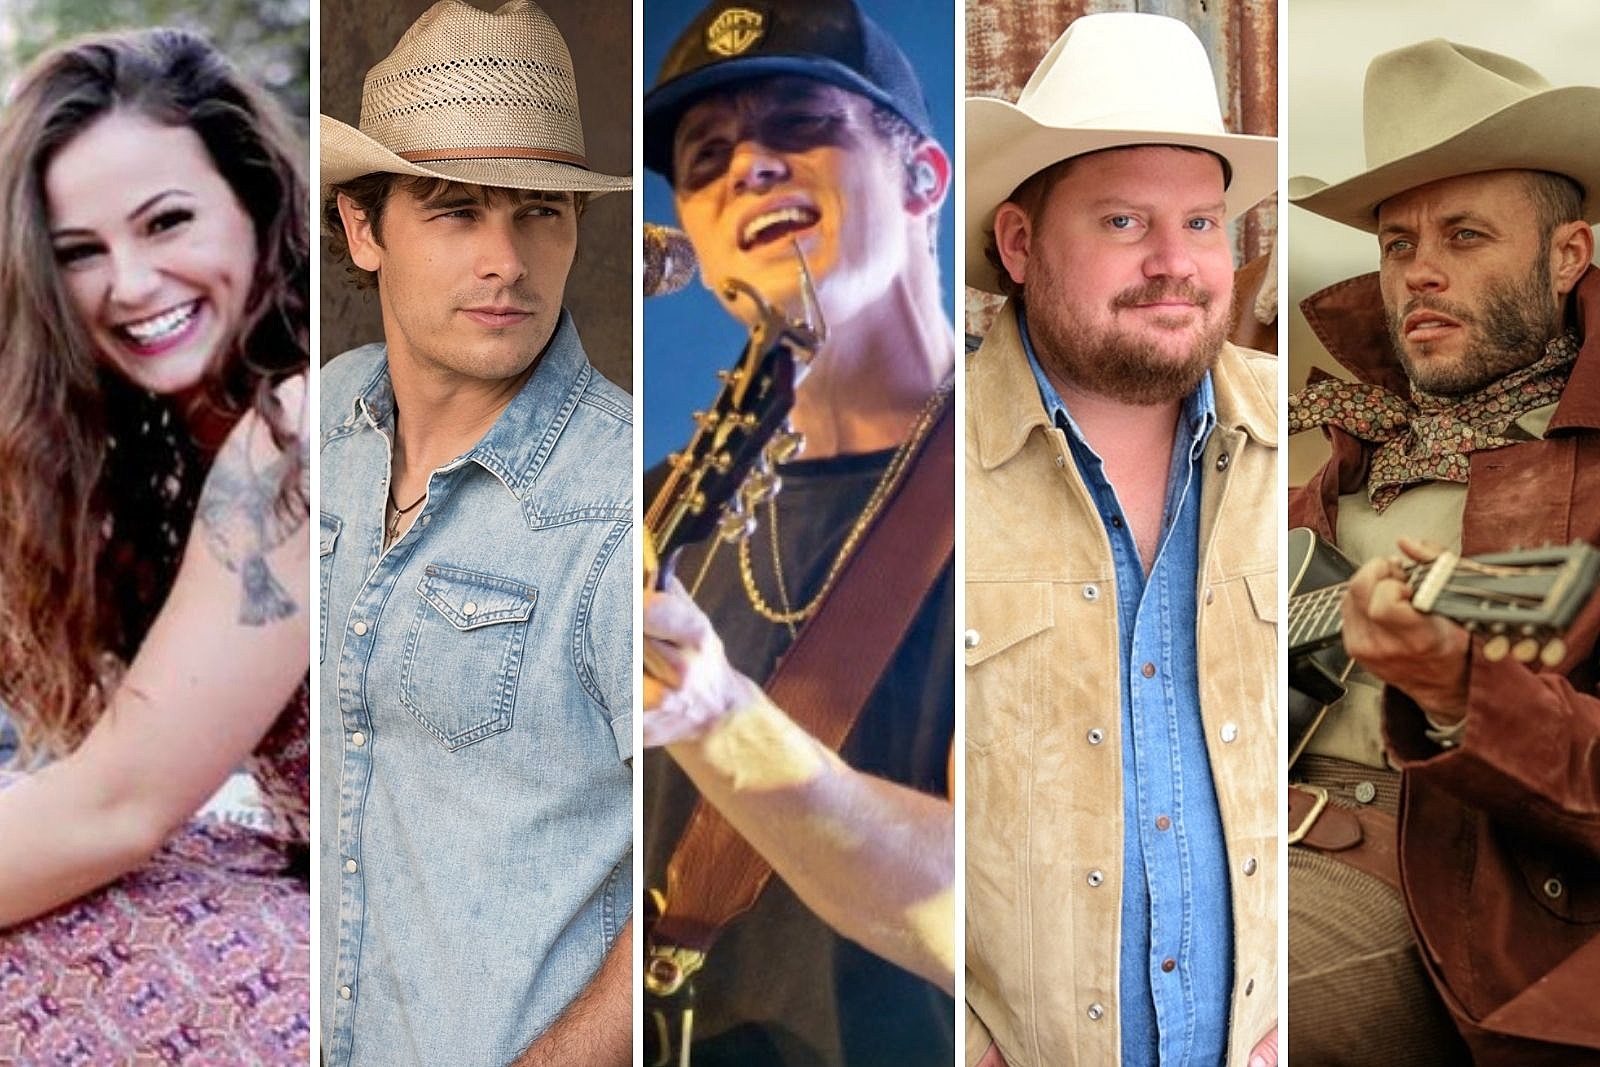 Our 21 Favorite Texas and Red Dirt Singles of 21… So image